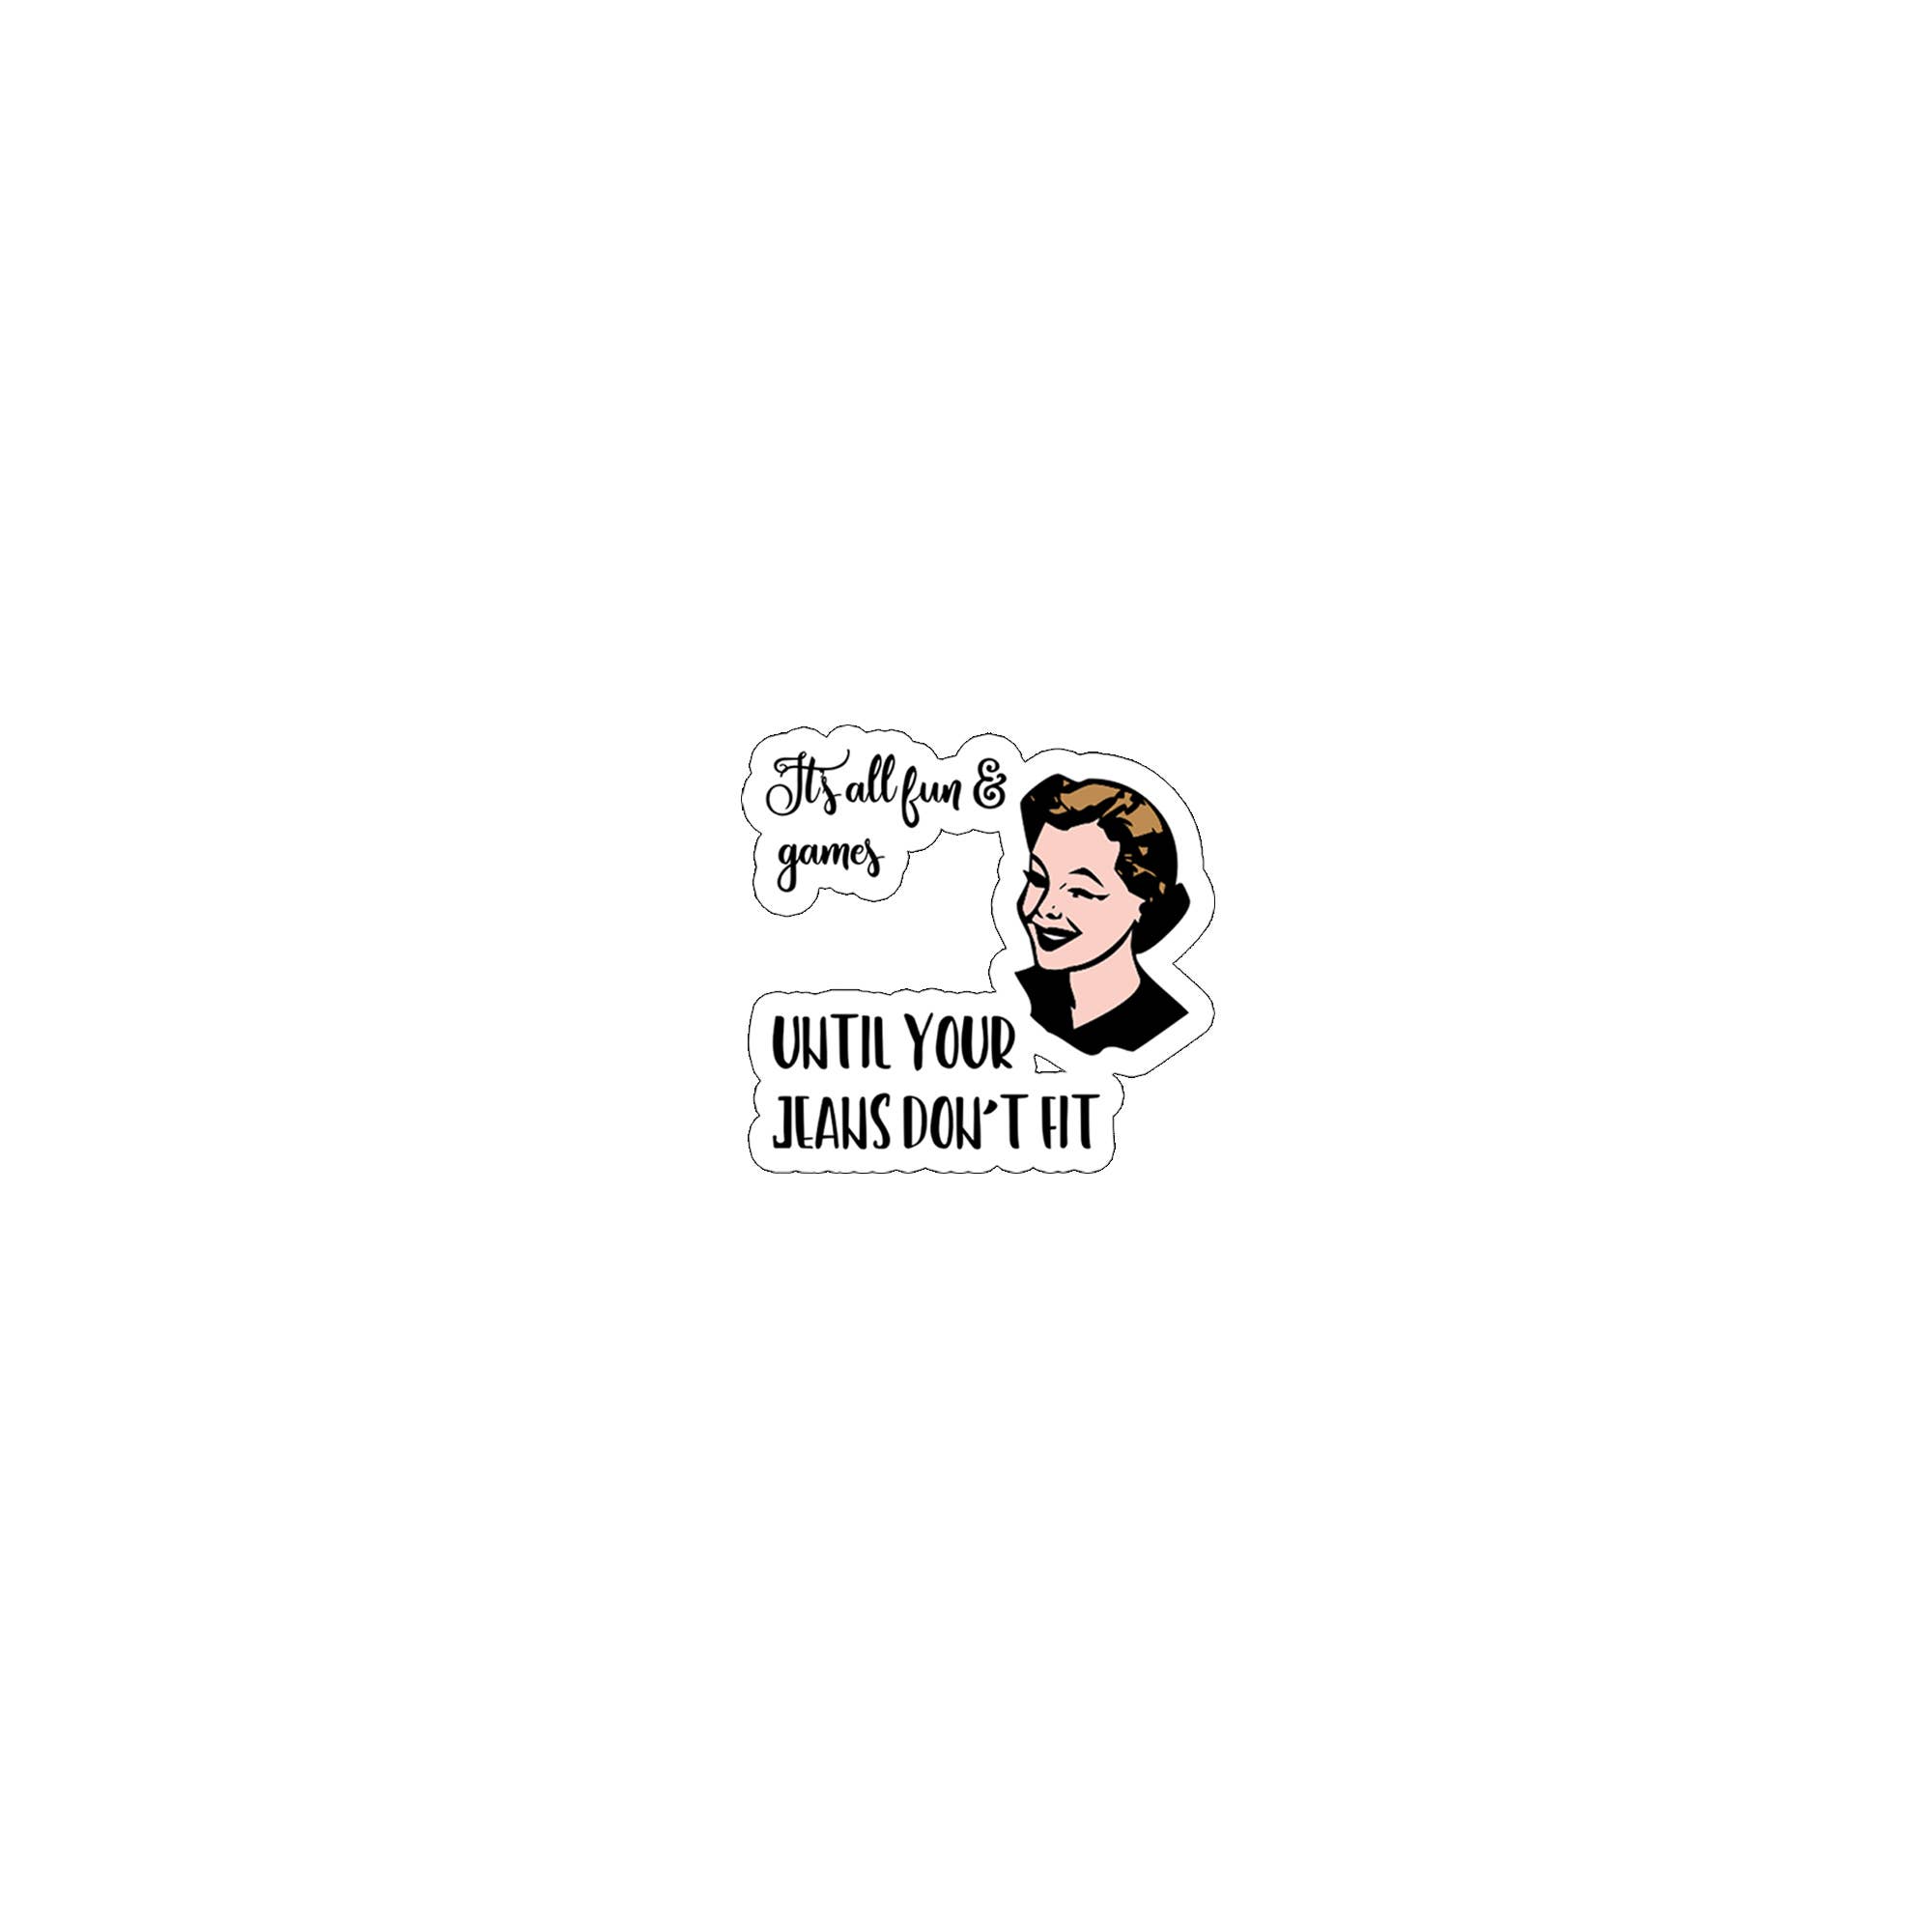 Witty Women Sticker - Fun & Games...Jeans - Hilarious Decal